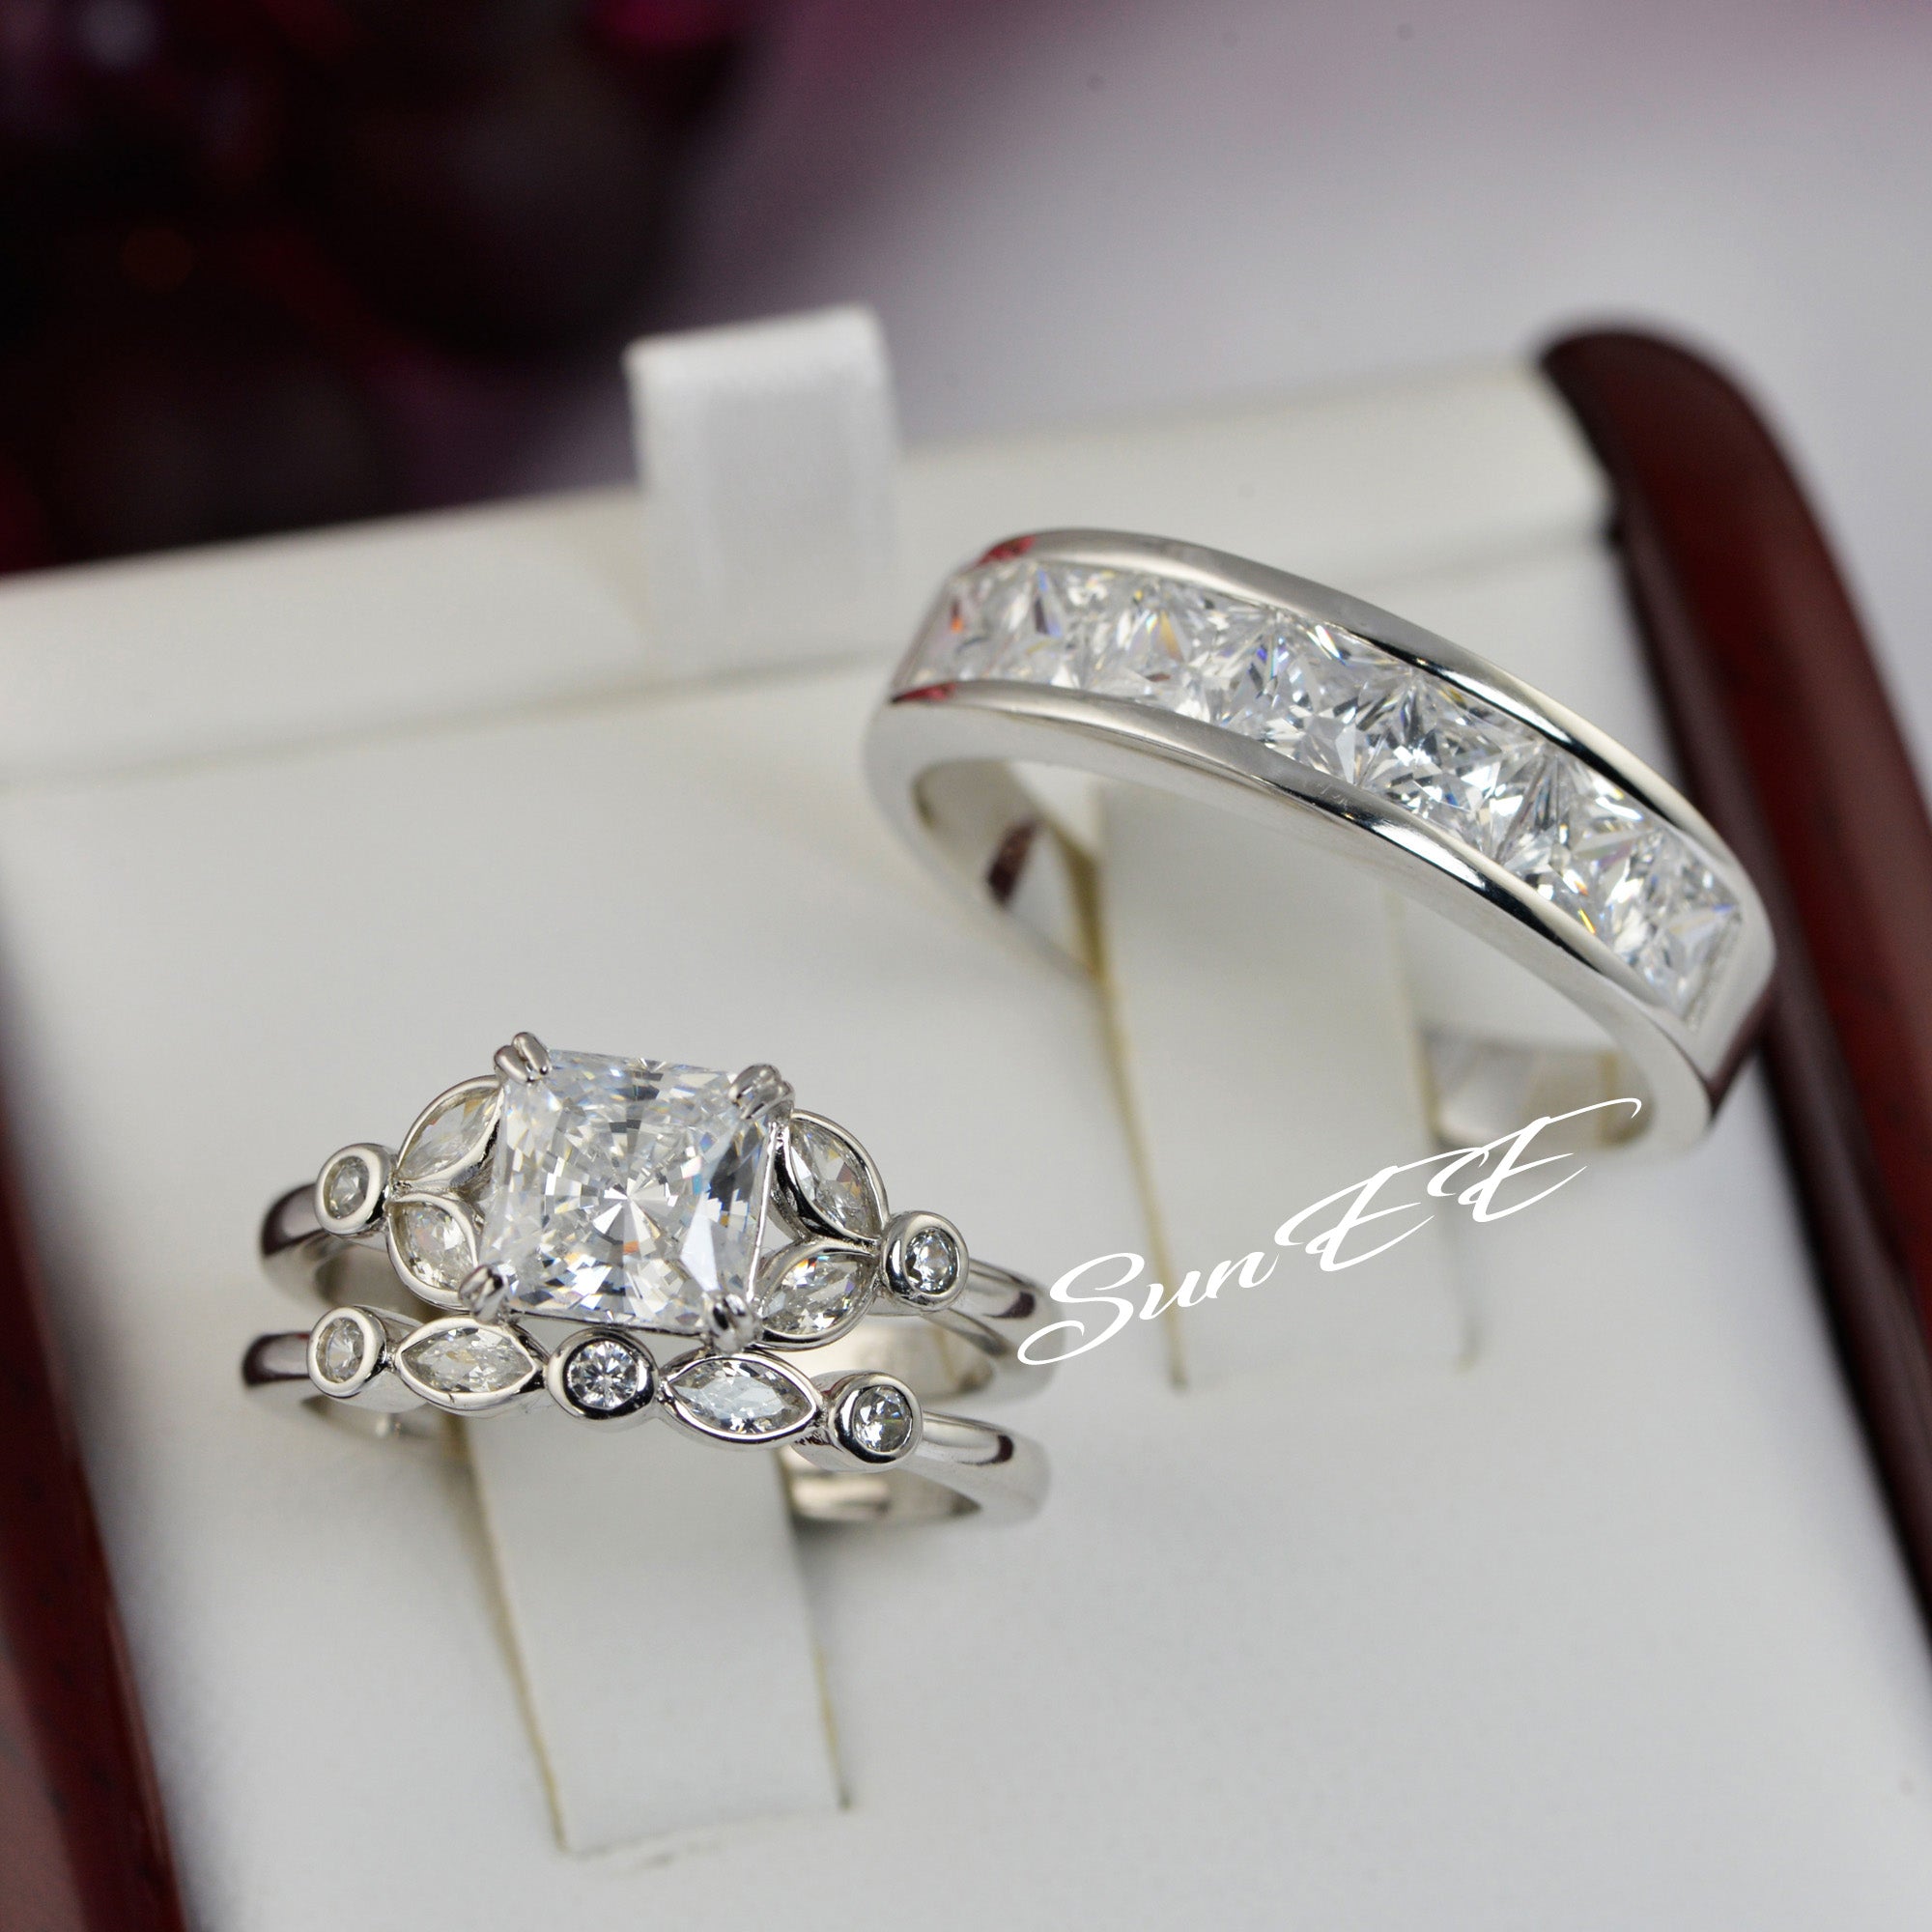 Buy Endless Love Matching Couple Rings for Him and Her Set, Adjustable S925  Silver Romantic Heart Design, Engagement Ring Anniversary Ring Online at  desertcartINDIA